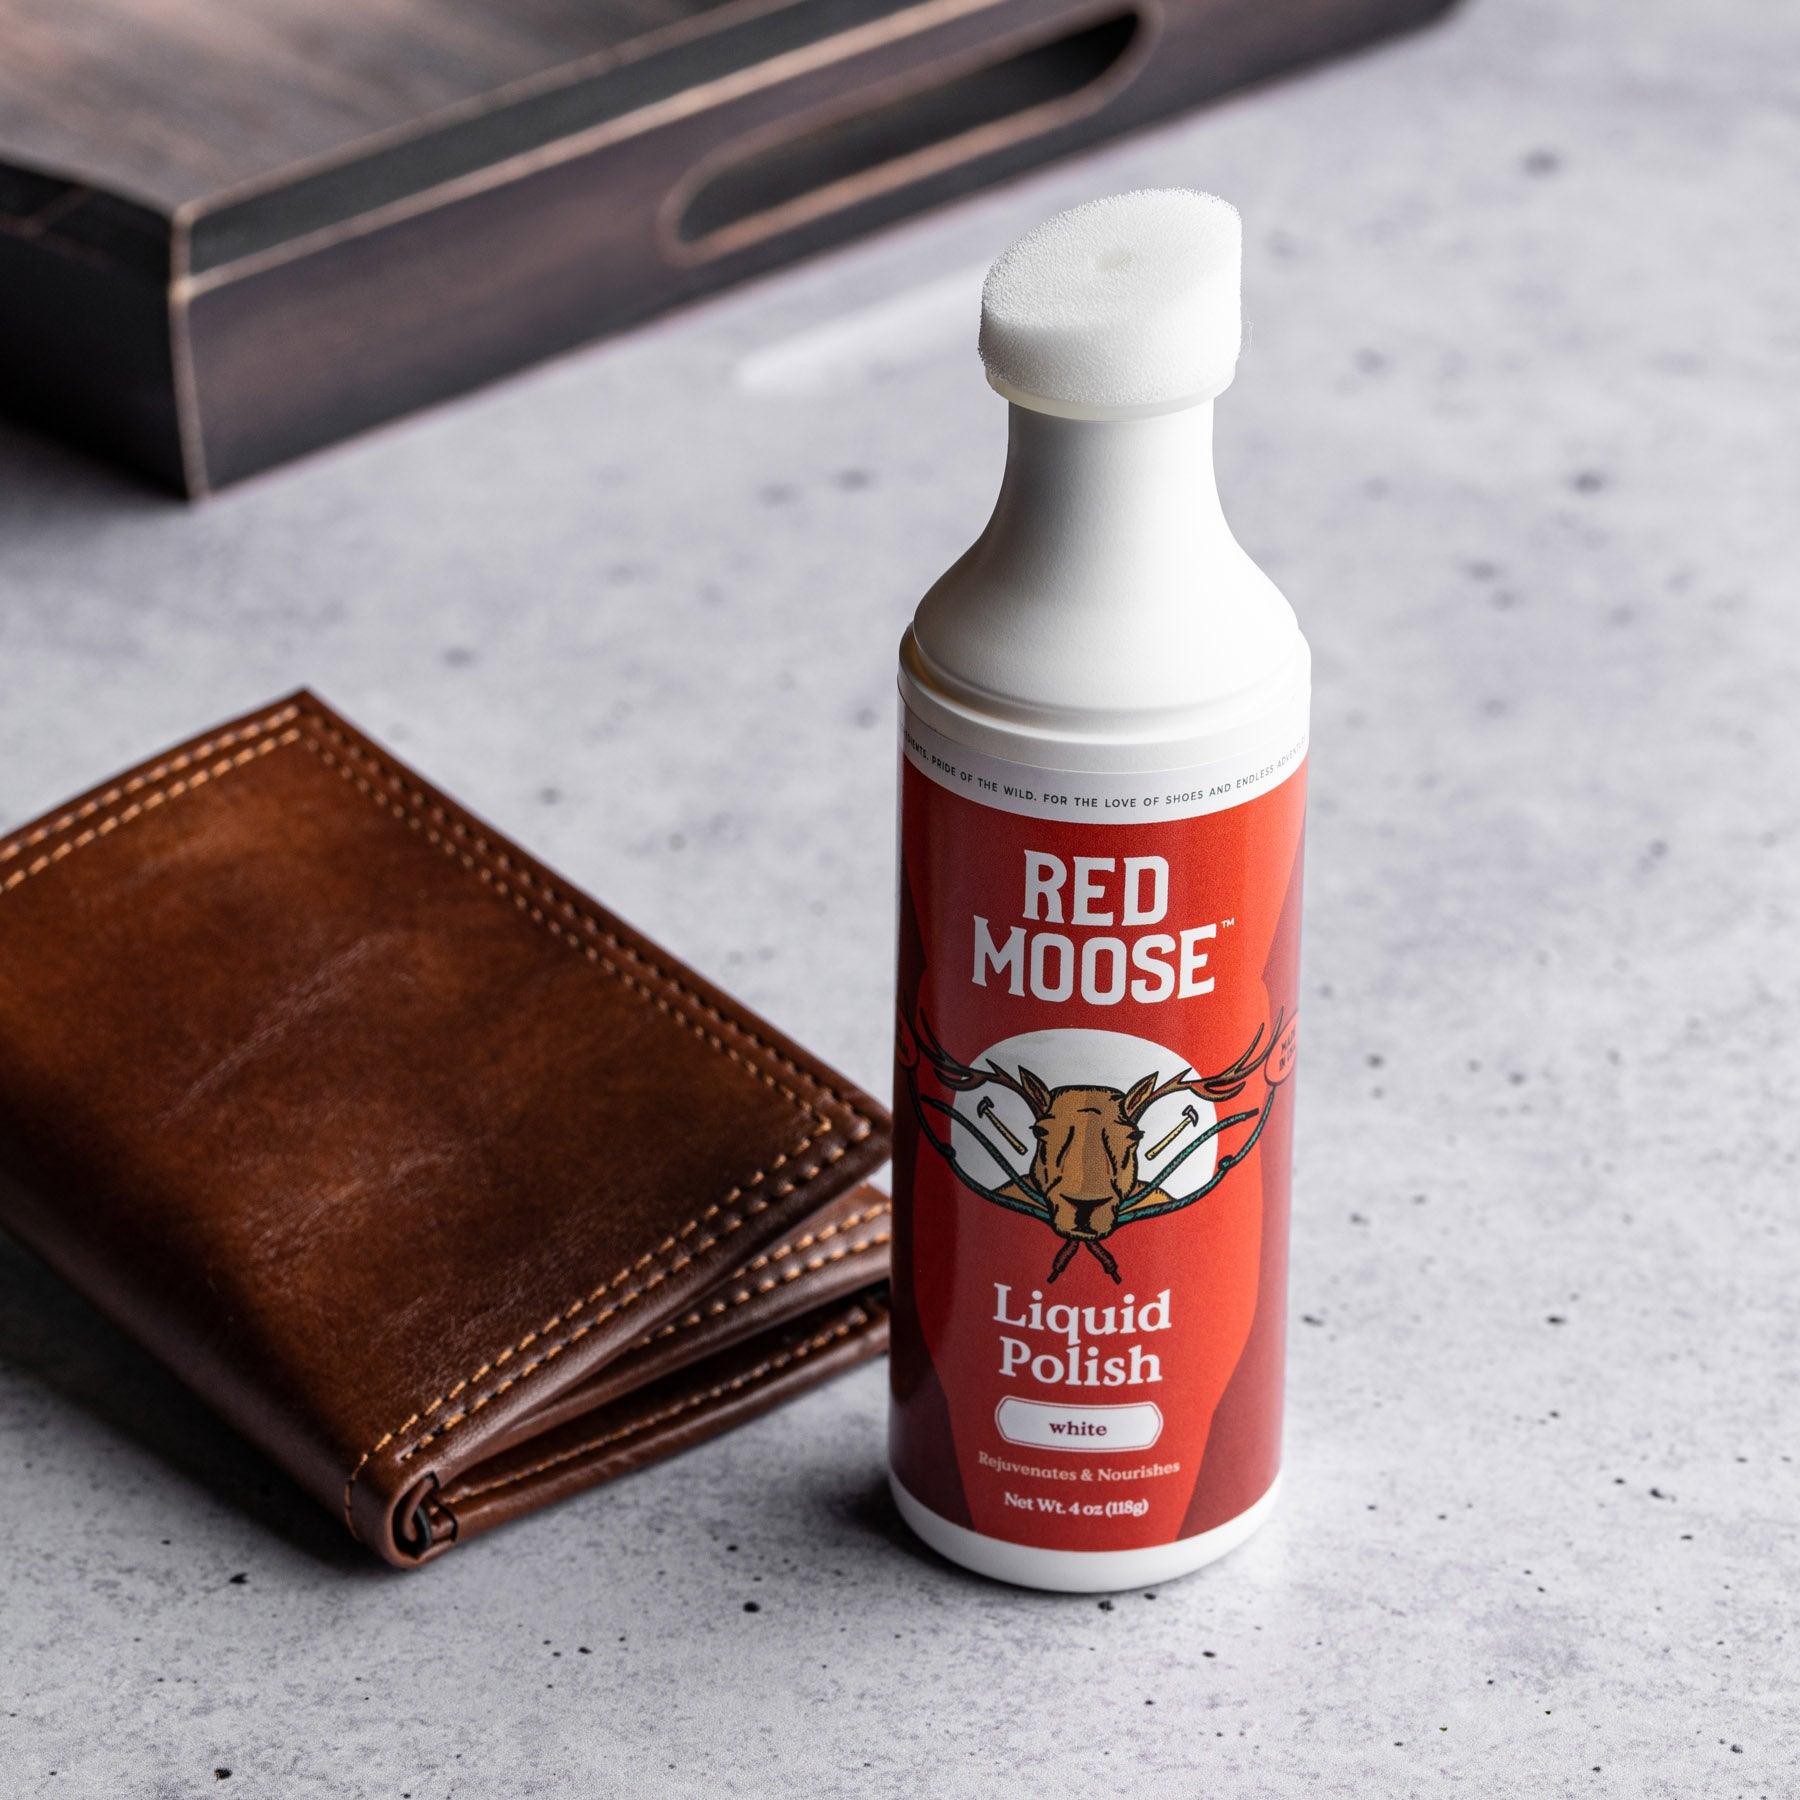 Red Moose Liquid Shoe Polish - 4 oz White - for Leather, Boots and Dress Shoes